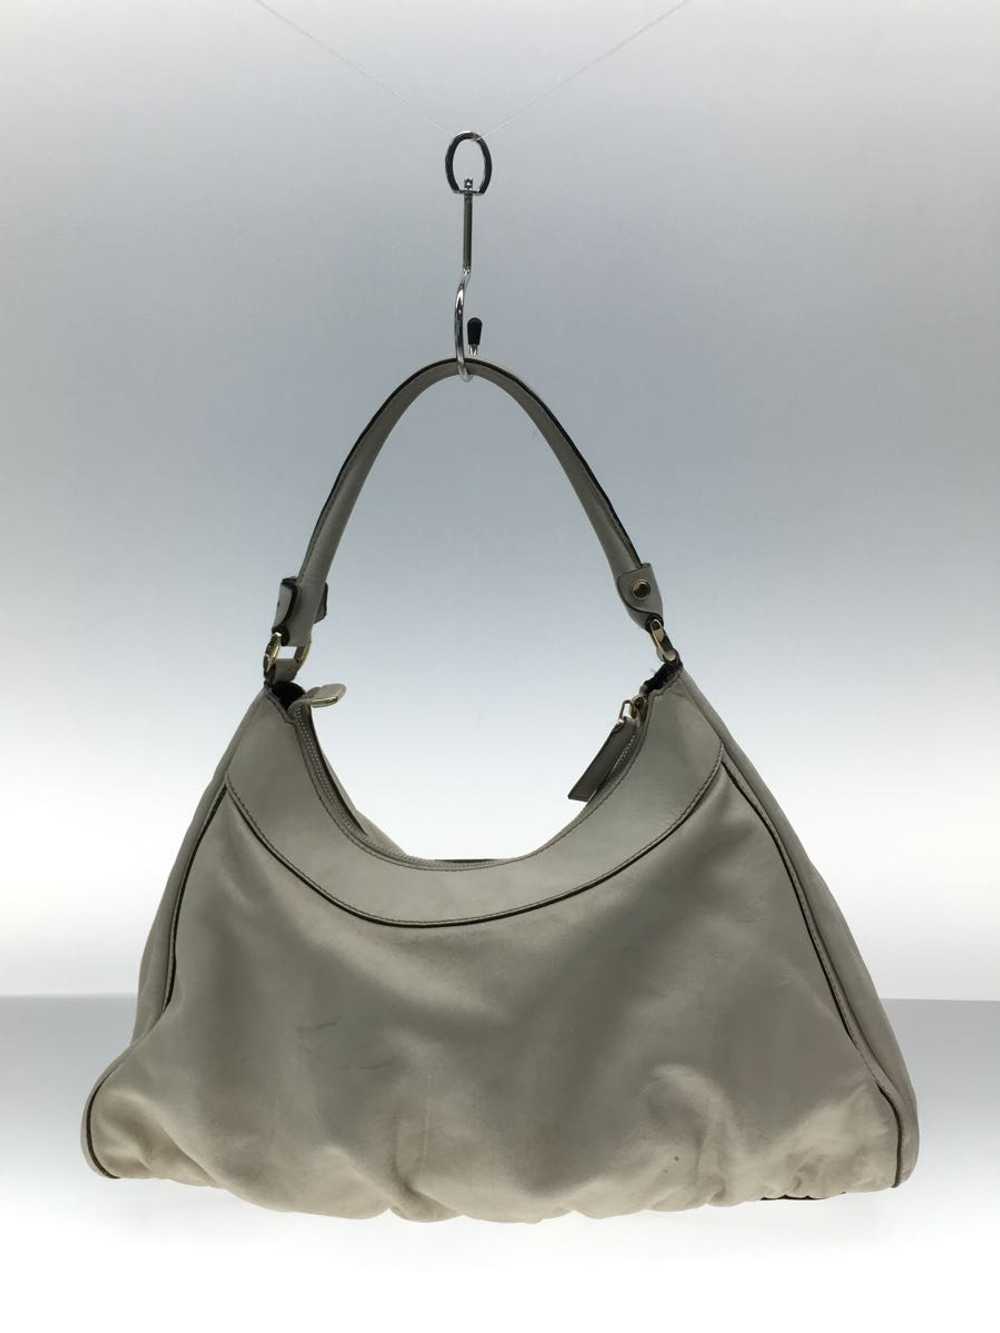 Used Gucci Shoulder Bag Abby Leather White/Leather - image 3